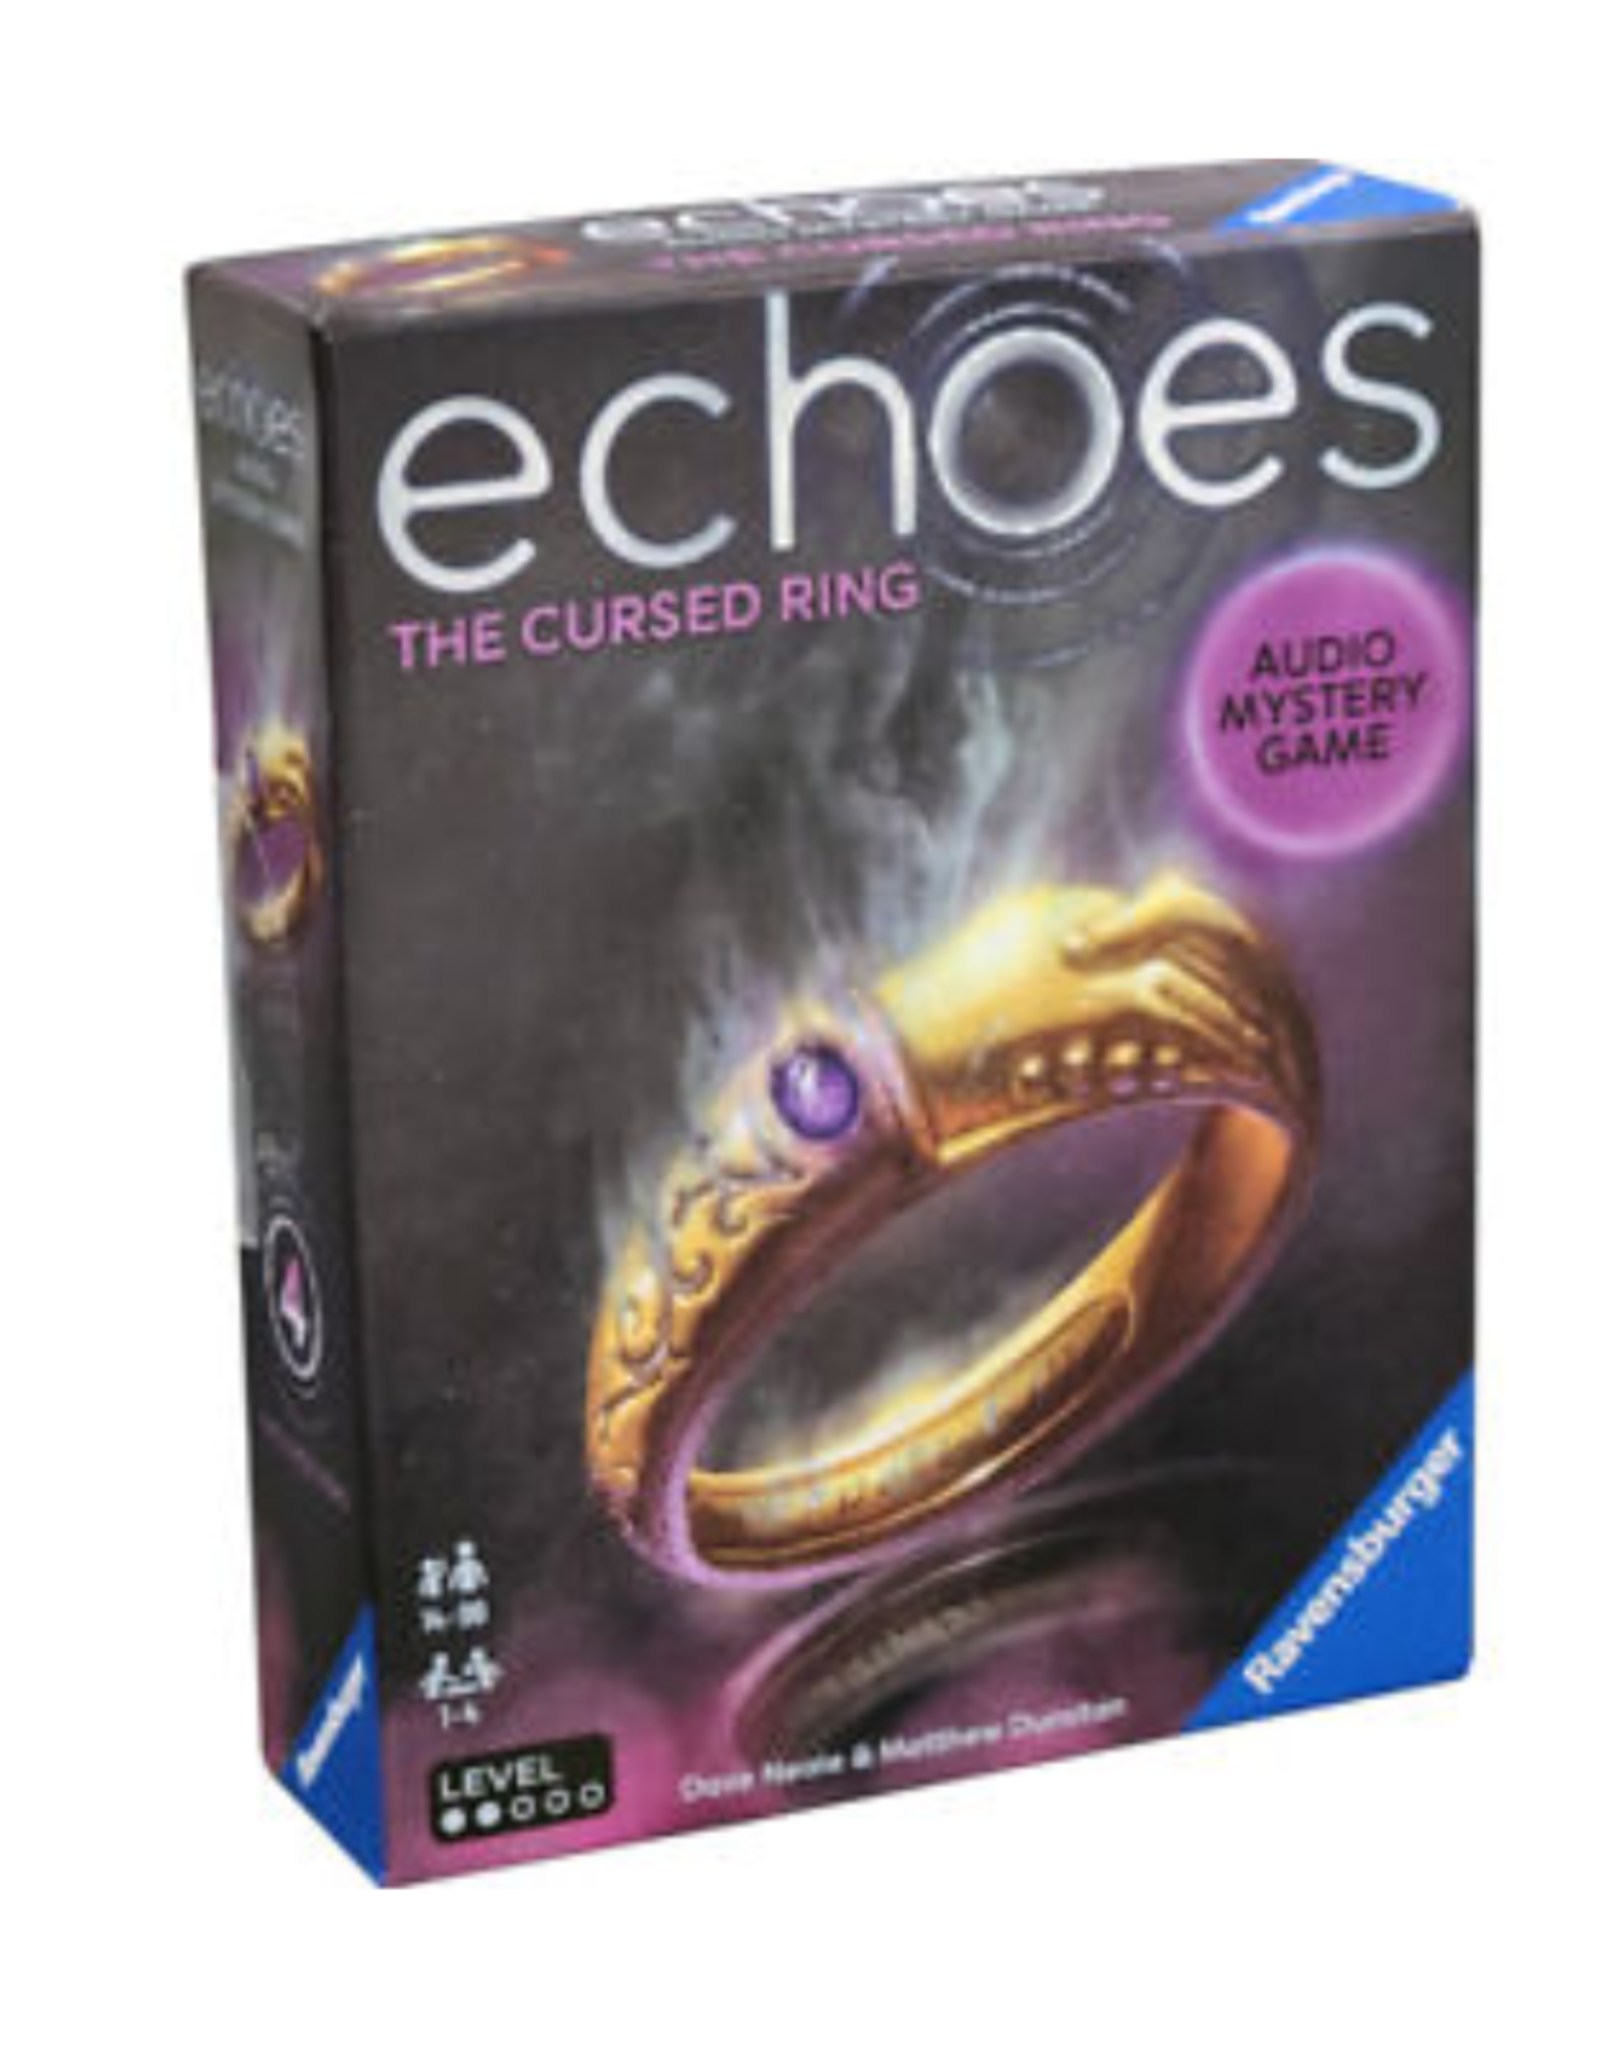 Ravensburger Echoes: The Ring